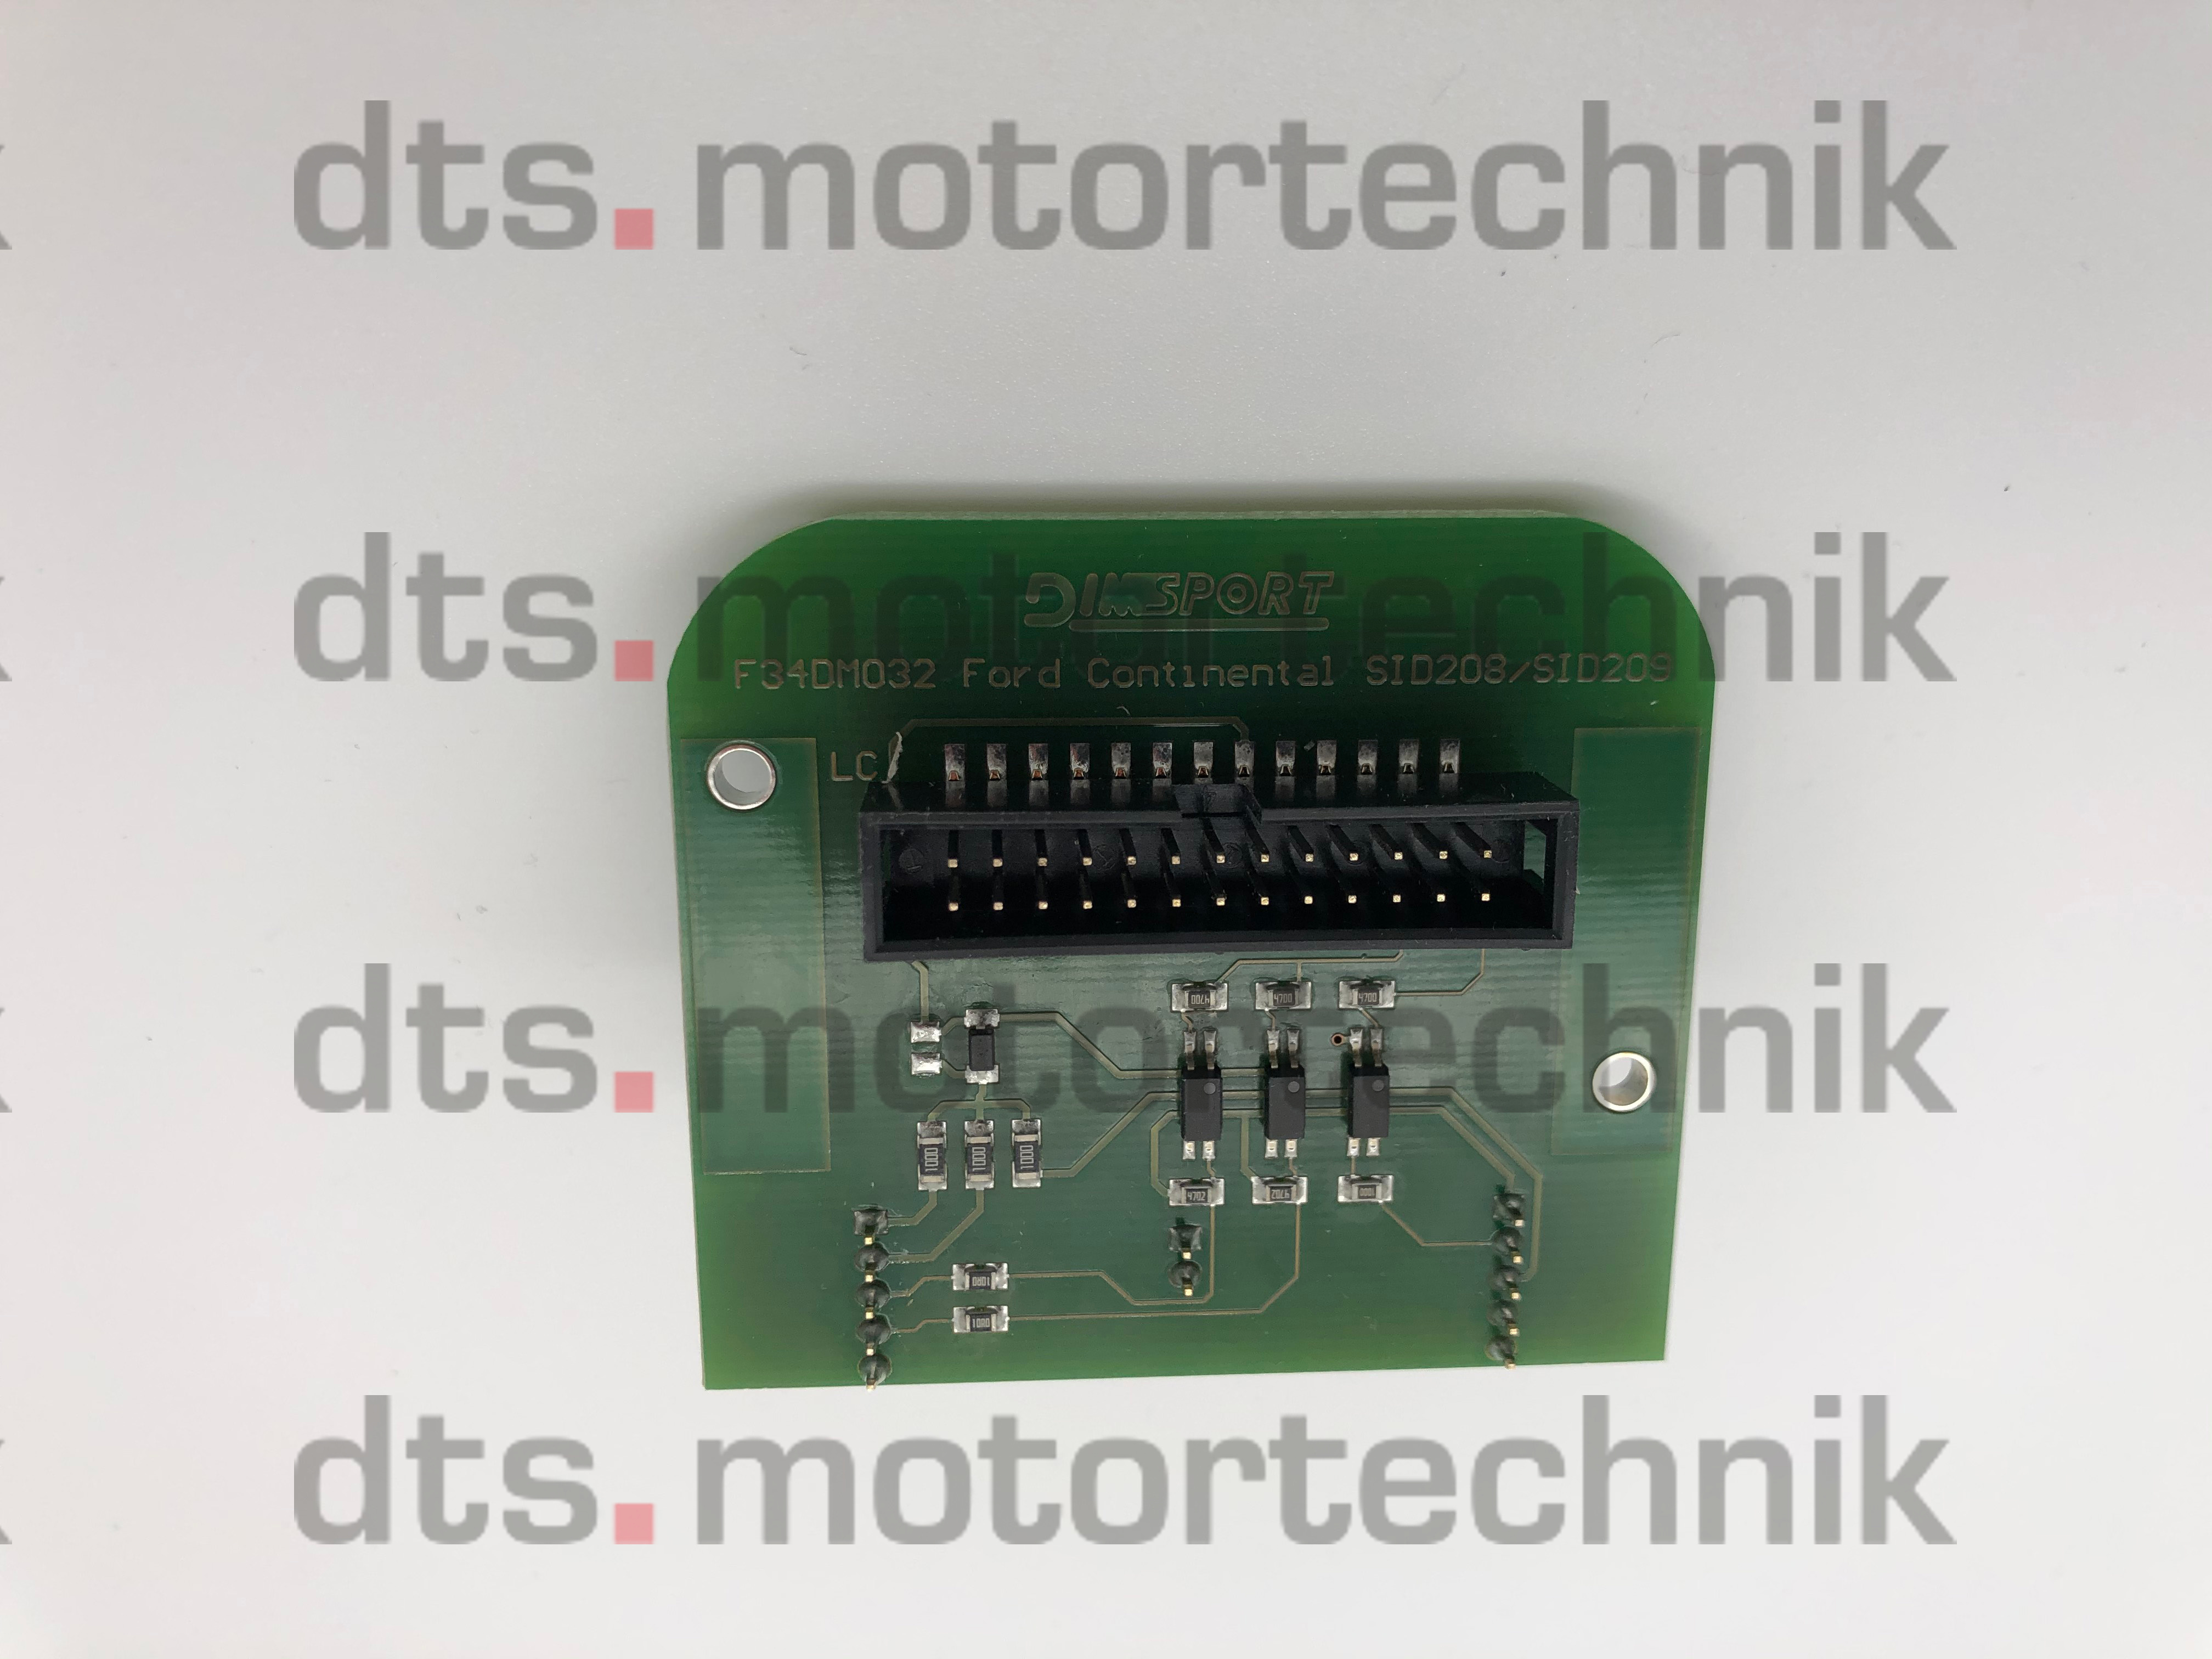 Continental SID208/SID209 (Ford) Infineon Tricore CPU Terminaladapter